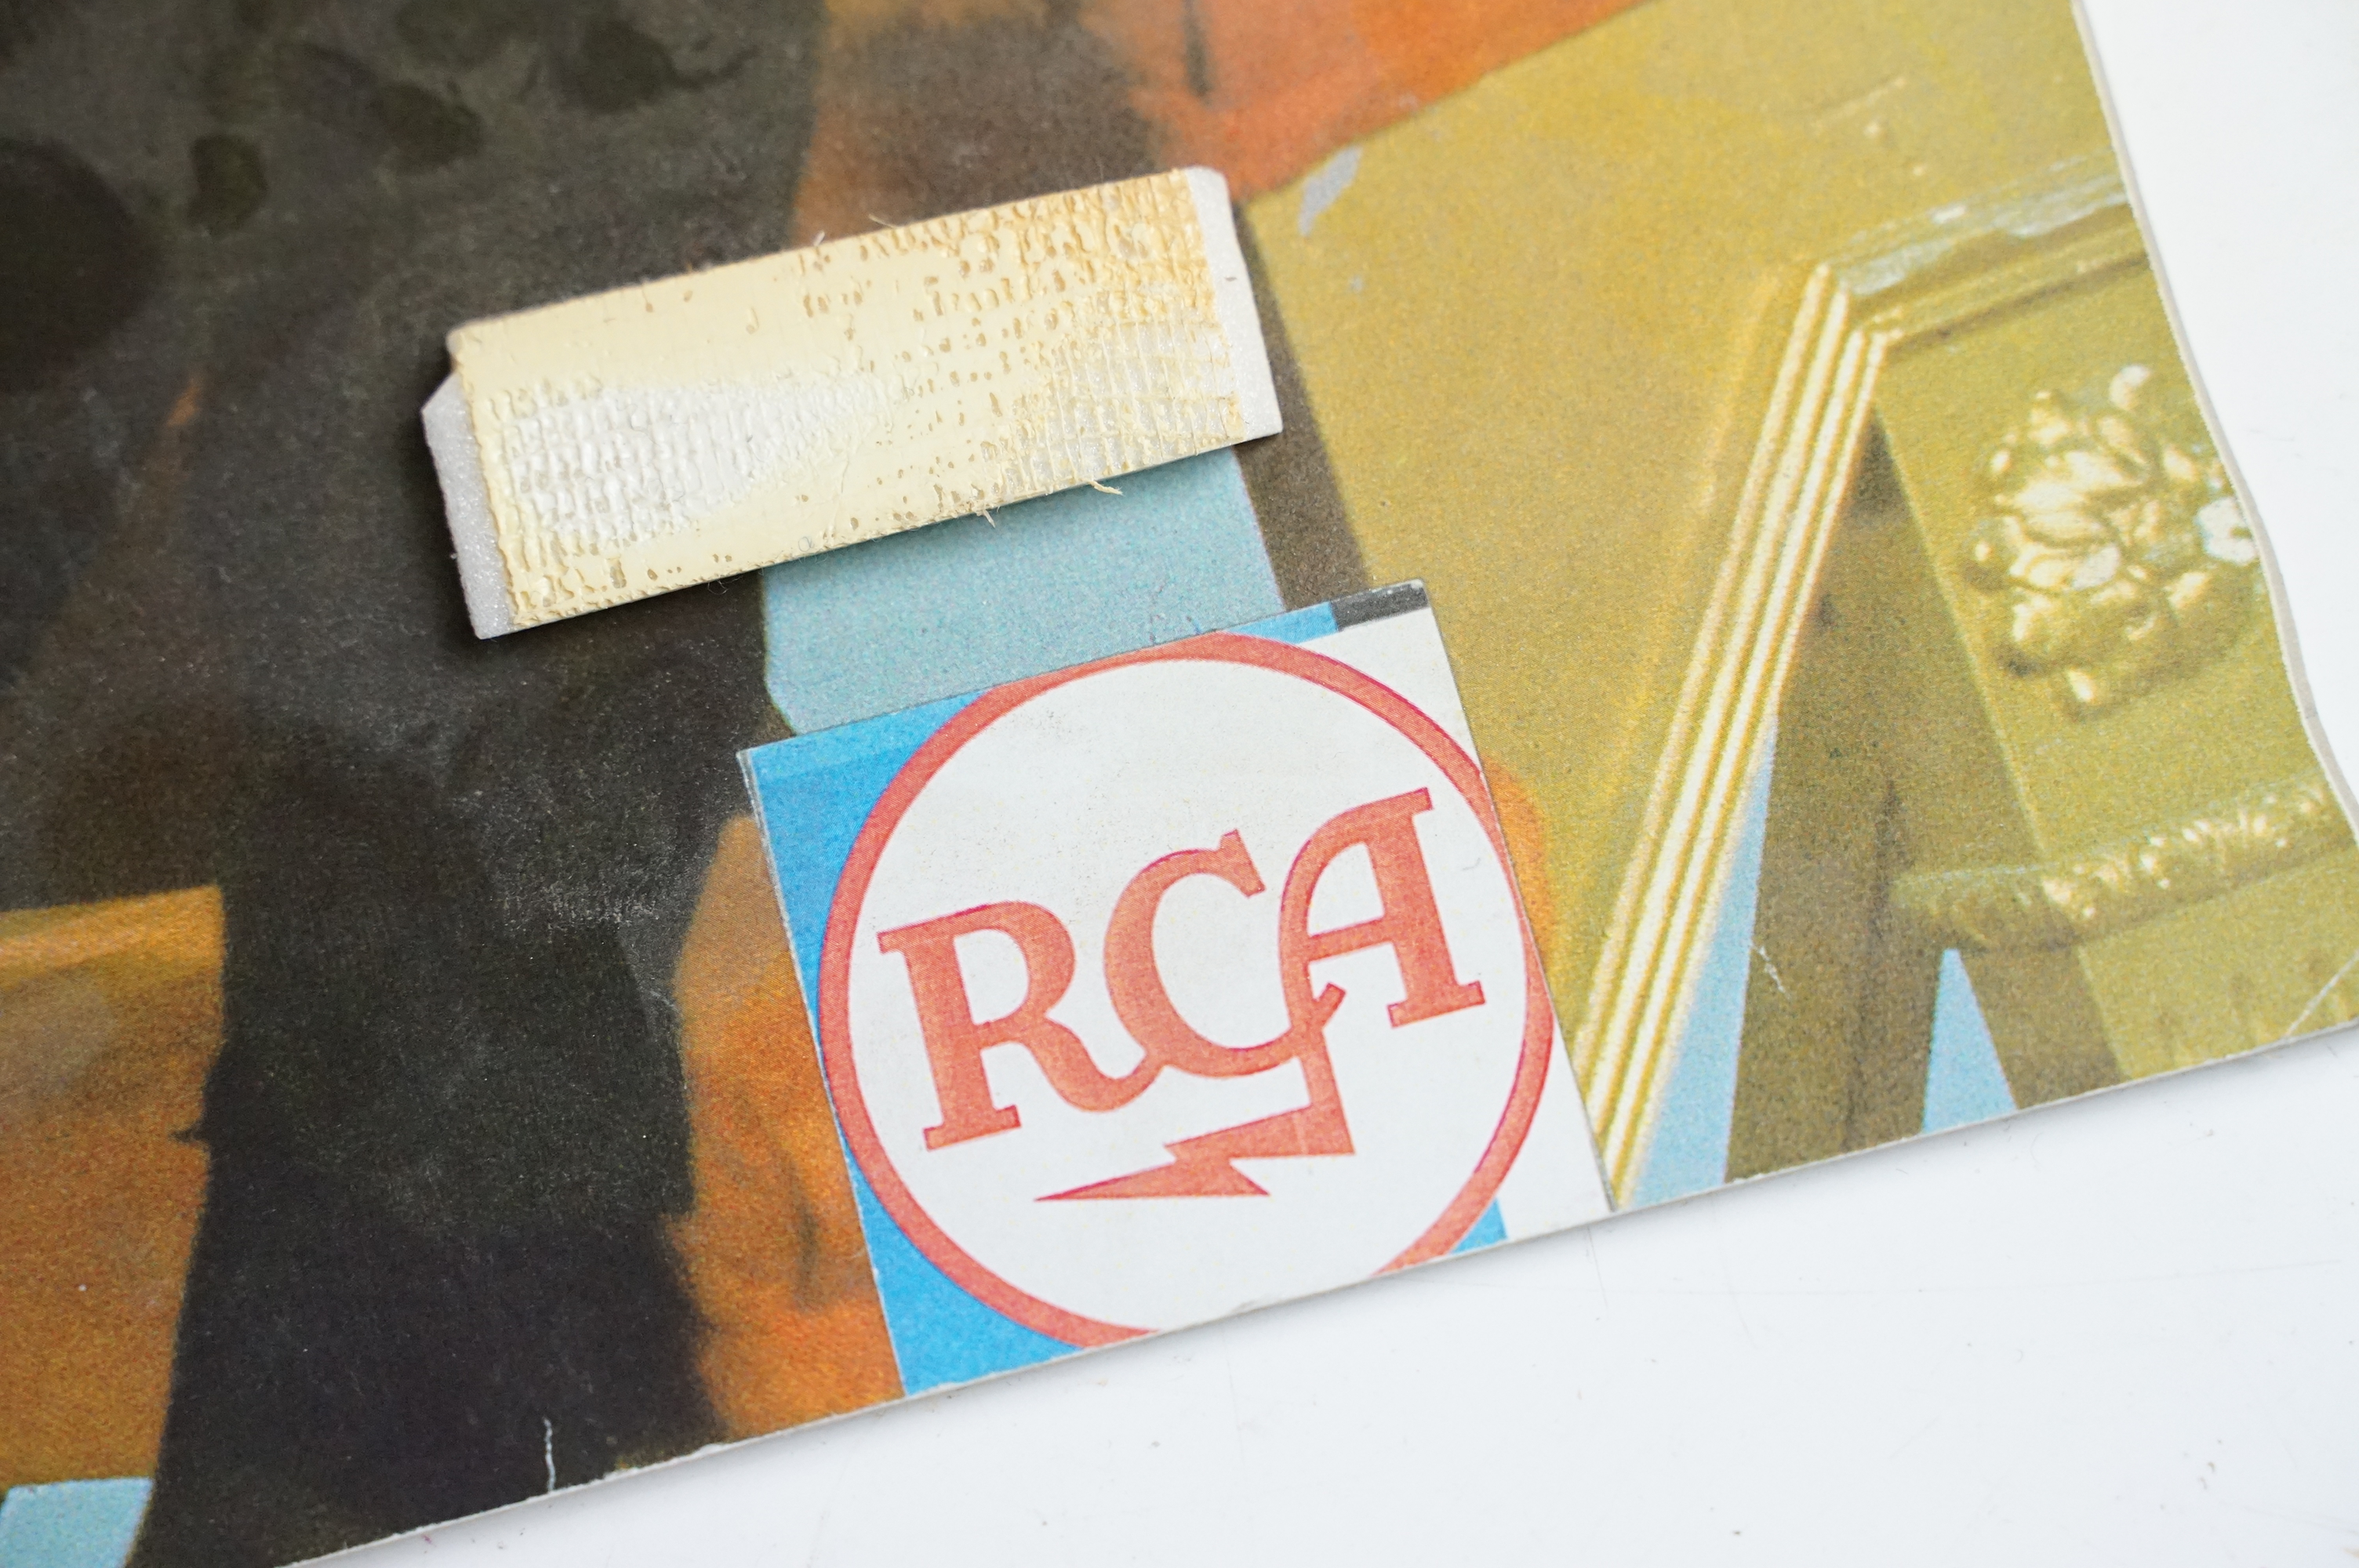 Table top easel back cardboard cut out of Elvis Presley advertising the record label RCA - Image 4 of 5